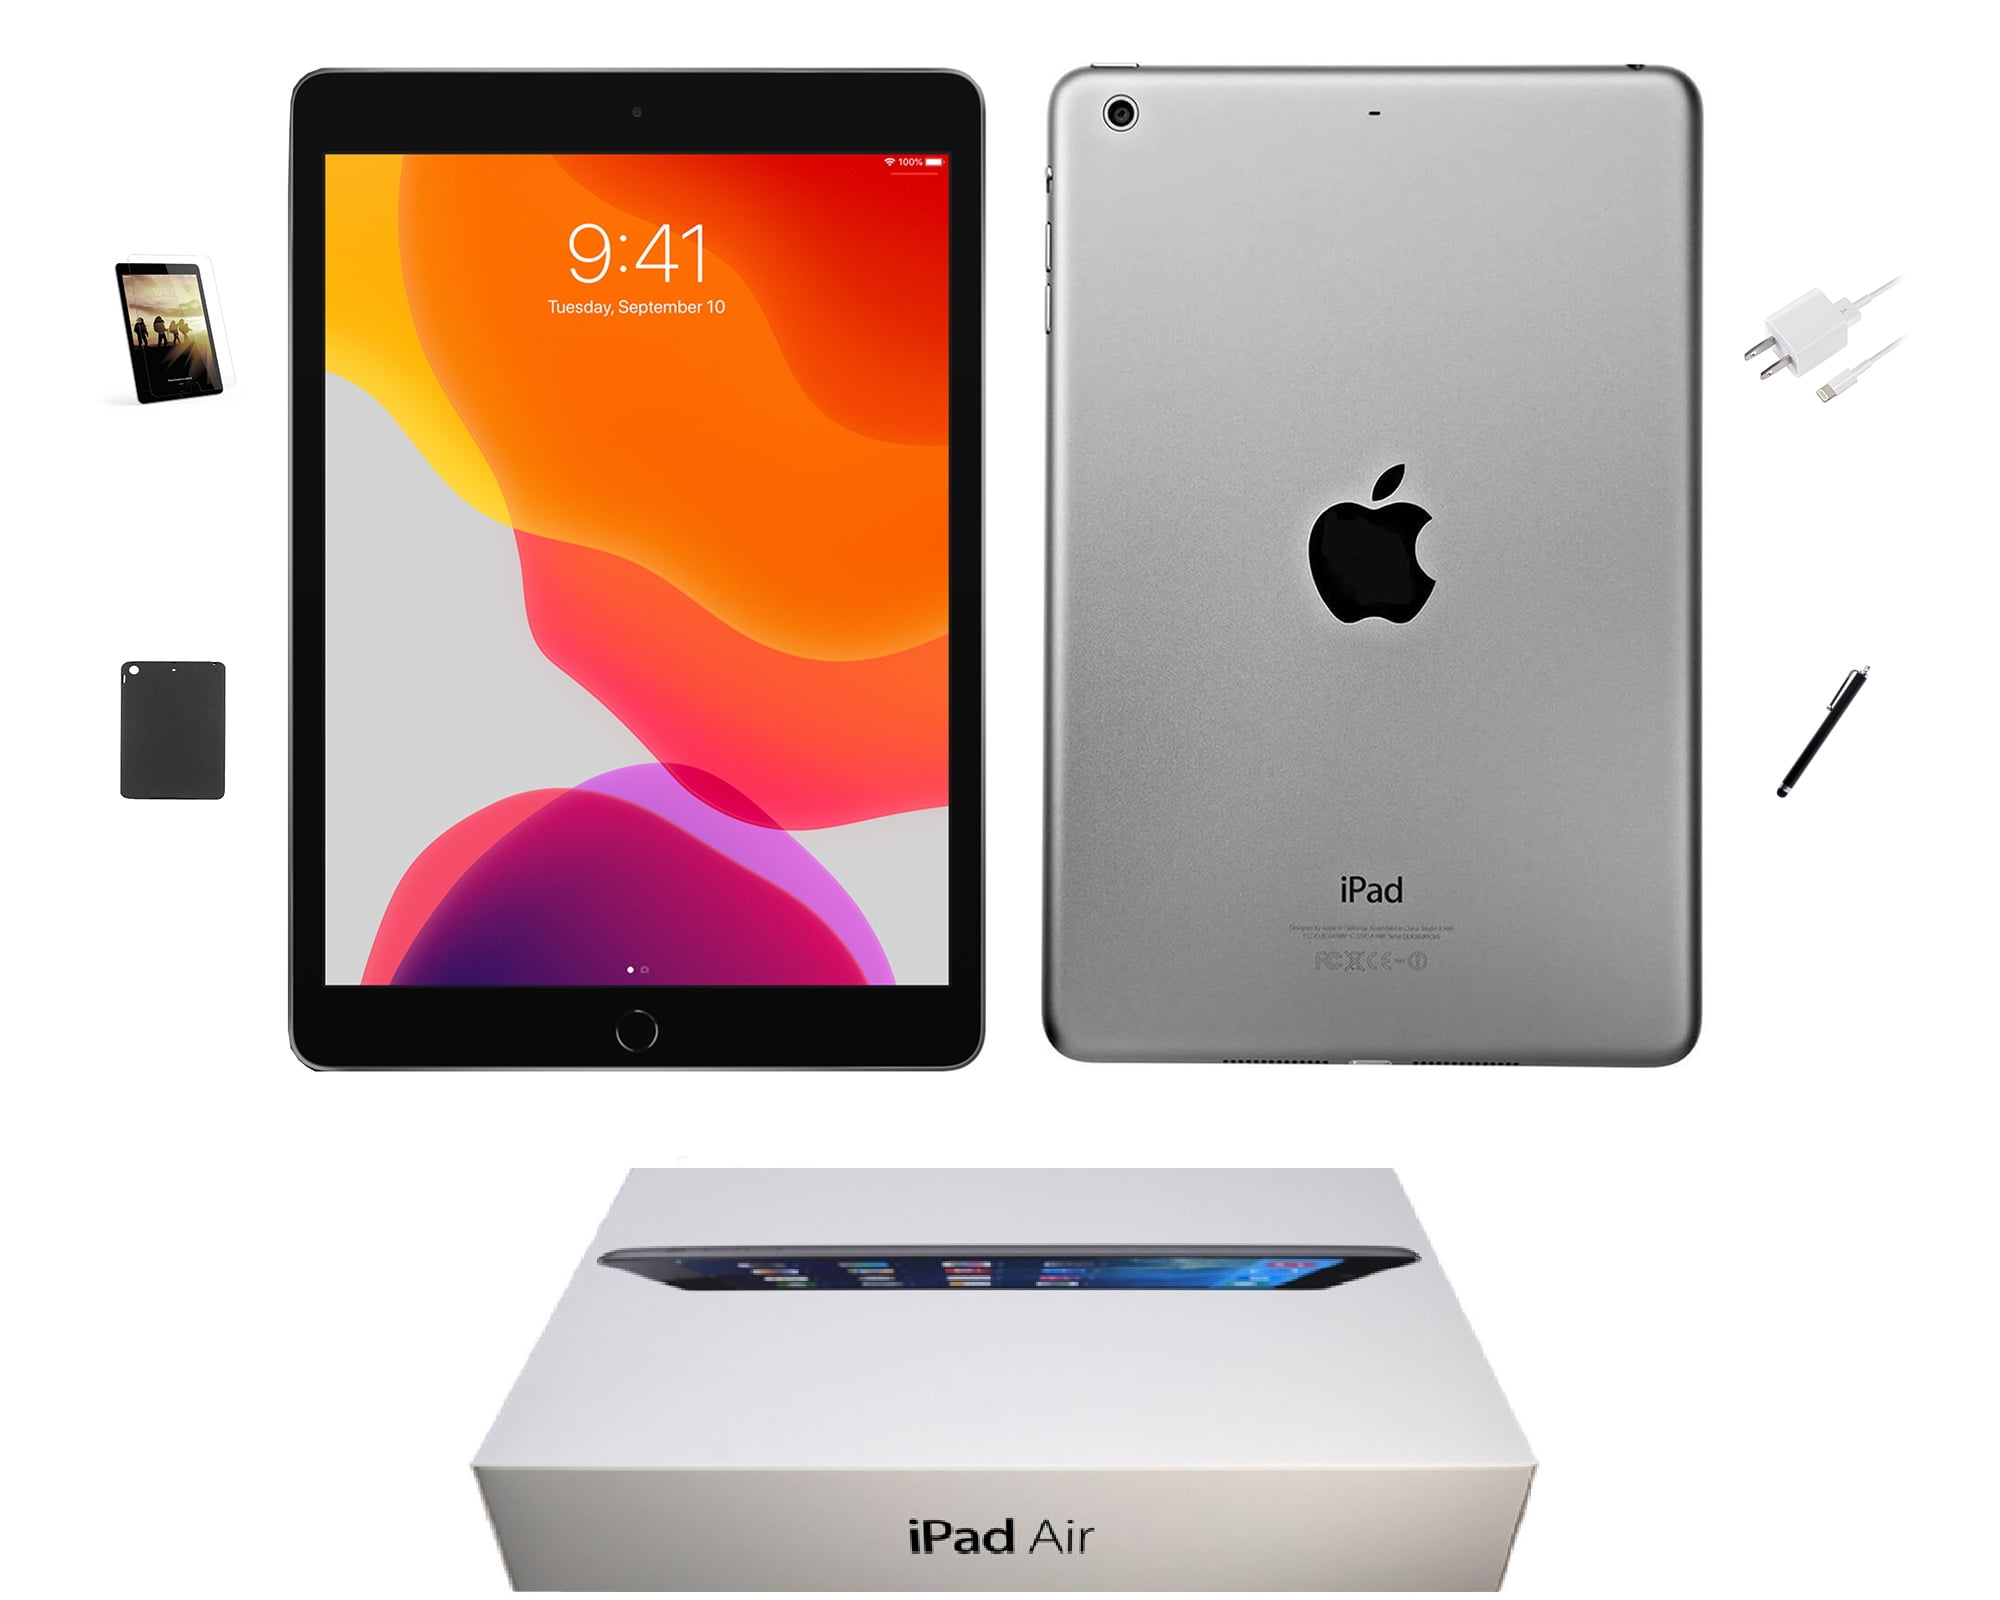 Refurbished Apple Ipad Air 16gb Space Gray Wi Fi Only 9 7 Inch Plus Bundle Original Box Case Tempered Glass Stylus Pen And Generic Charger Walmart Com Walmart Com